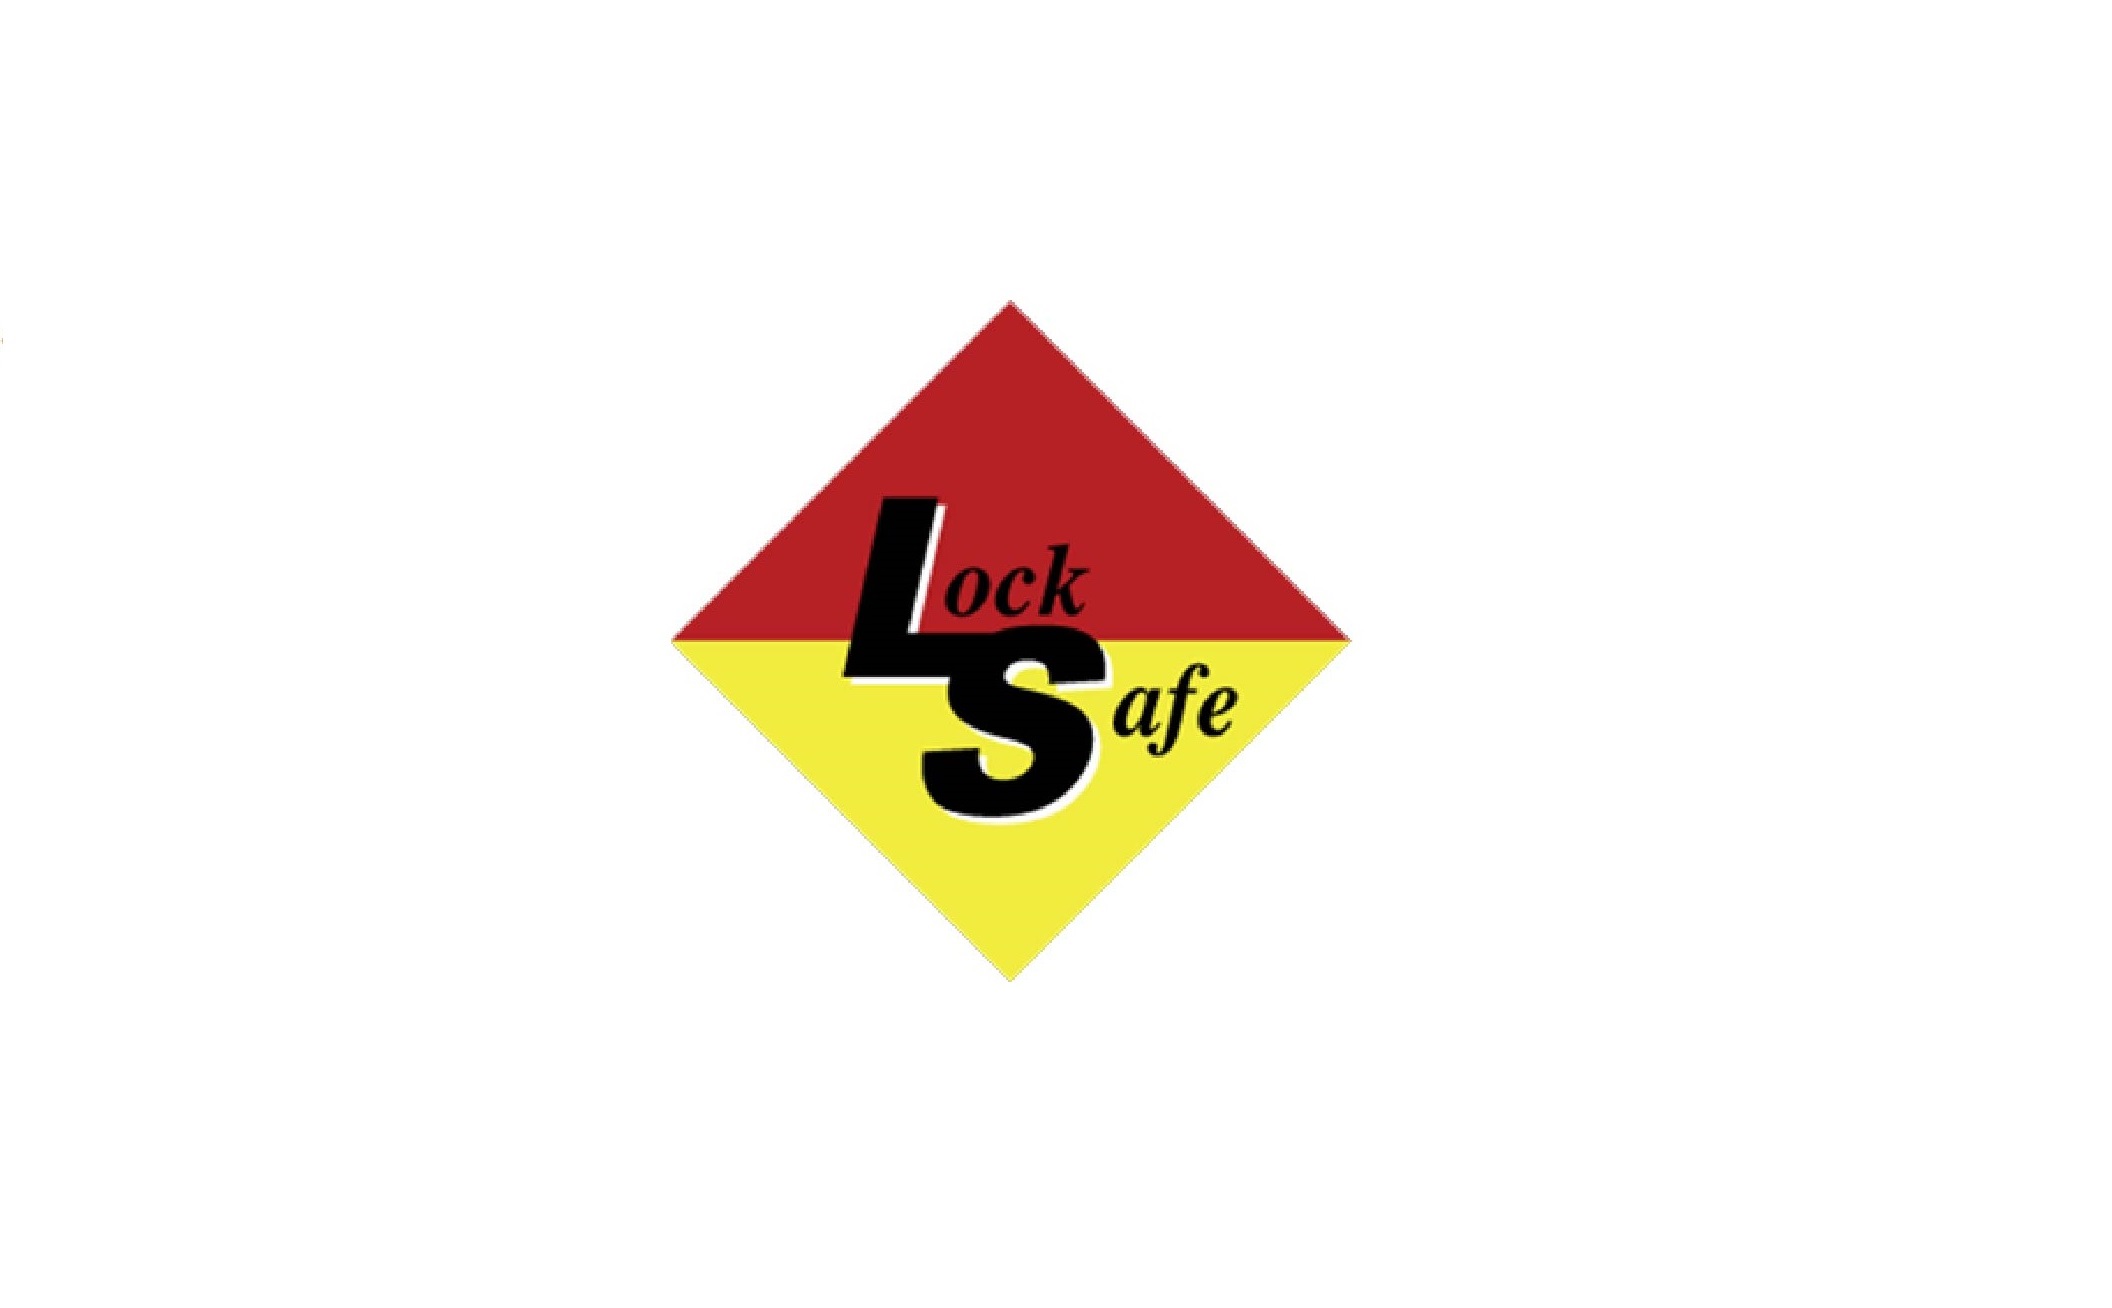 Locksafe Industrial Safety Equipment | 7/11-17 Canvale Rd, Canning Vale WA 6155, Australia | Phone: 08 9455 7255